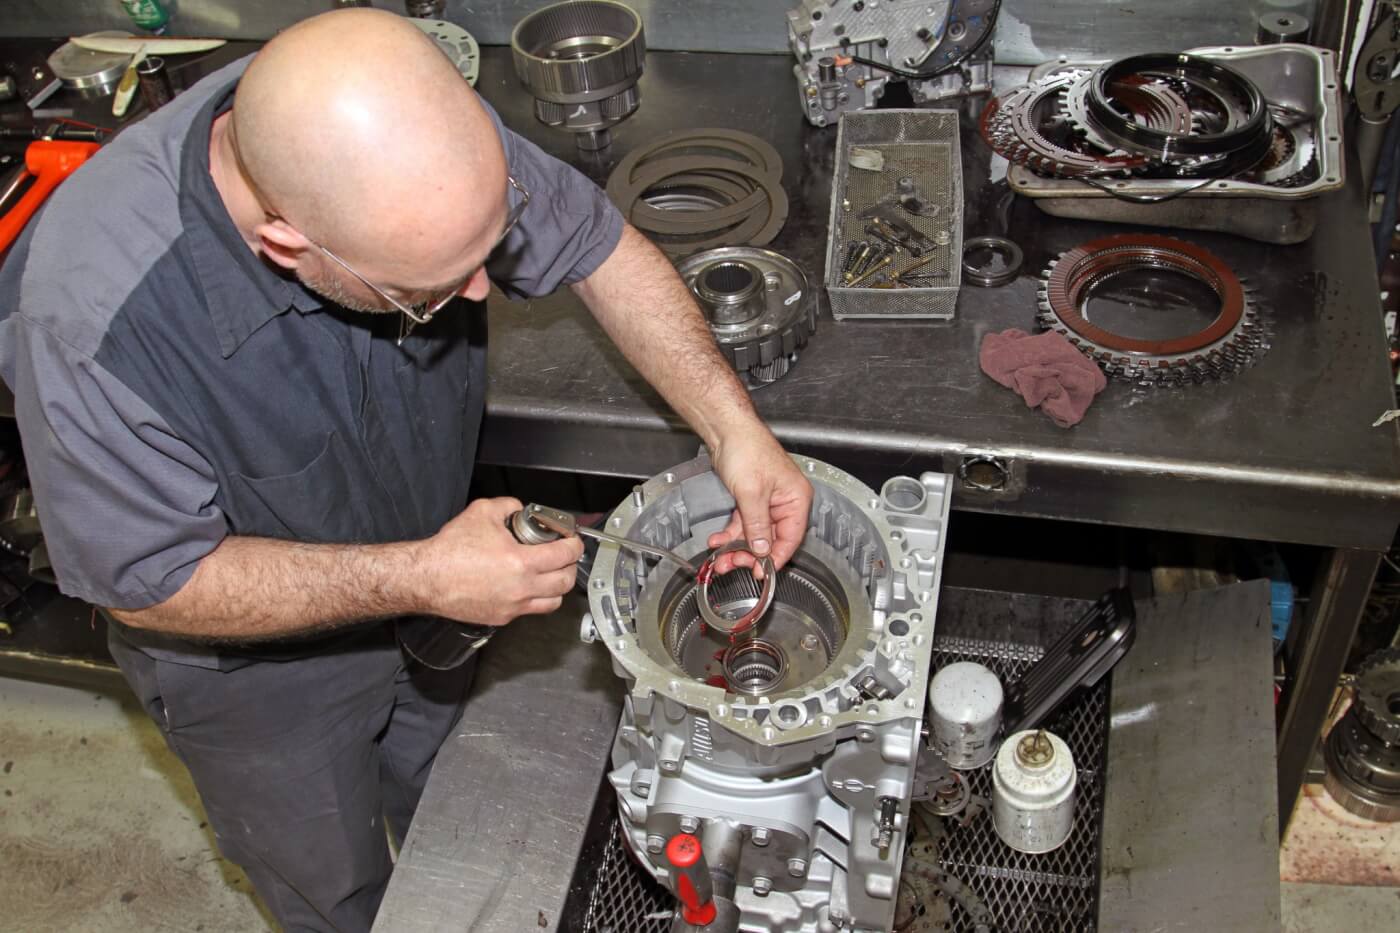 He carefully installs and aligns the new clutches and steels as well as the apply pistons and planetary gear sets lubricating the new Torrington bearings along the way.